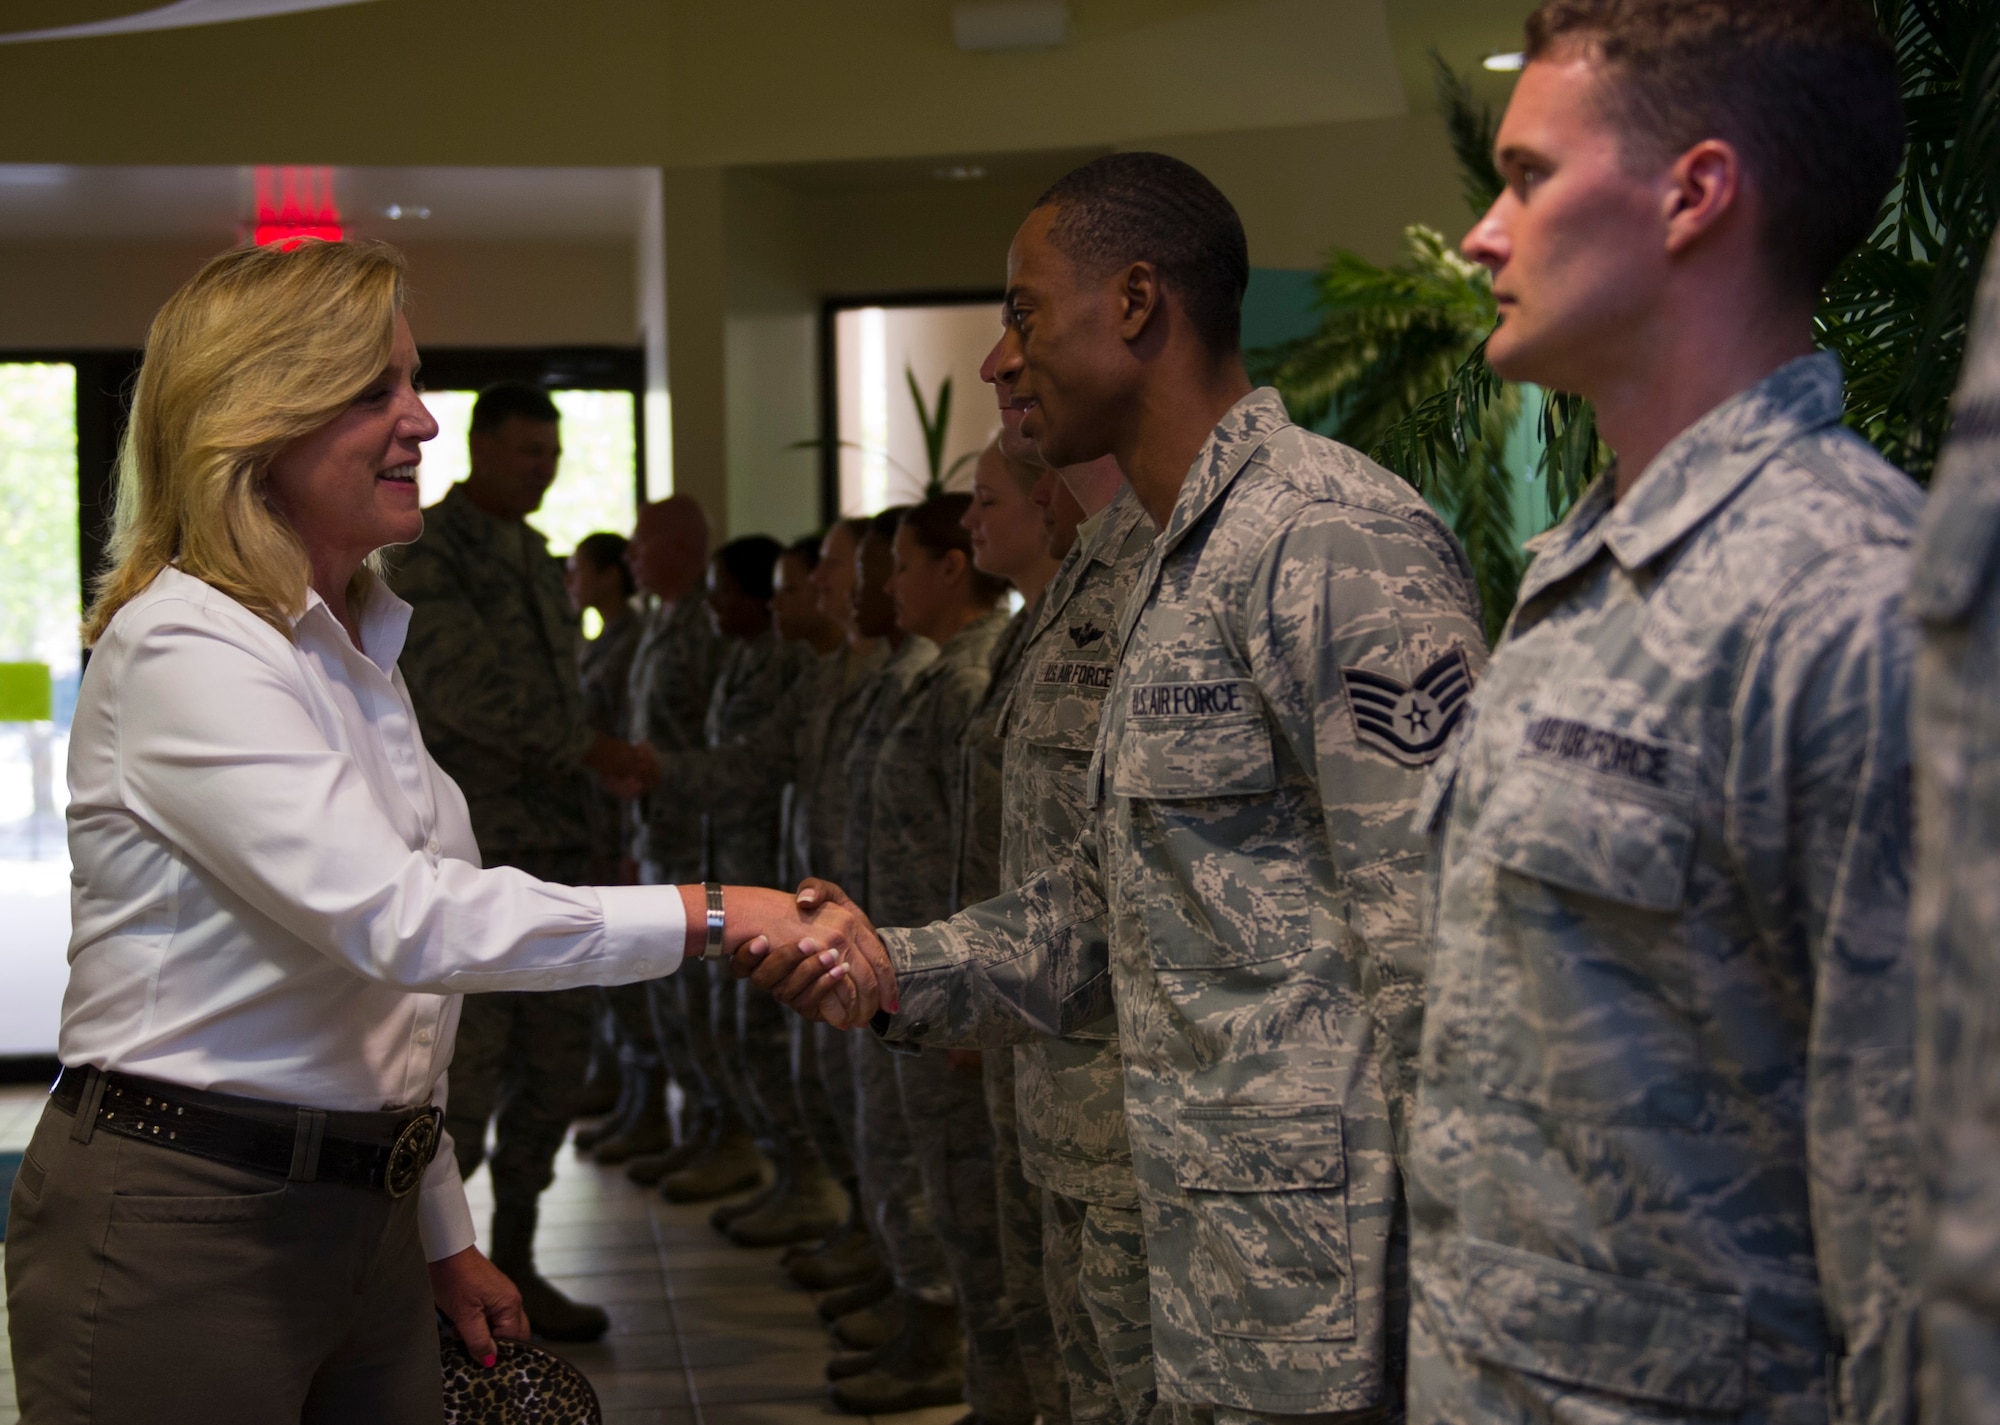 Secretary of the Air Force Deborah Lee James greets Air Commandos at the Riptide Dinning Facility at Hurlburt Field, Fla., Oct. 21, 2014. James met with Airmen and toured various facilities here to familiarize herself with Air Commando operations. (U.S. Air Force photo/Senior Airman Krystal M. Garrett) 